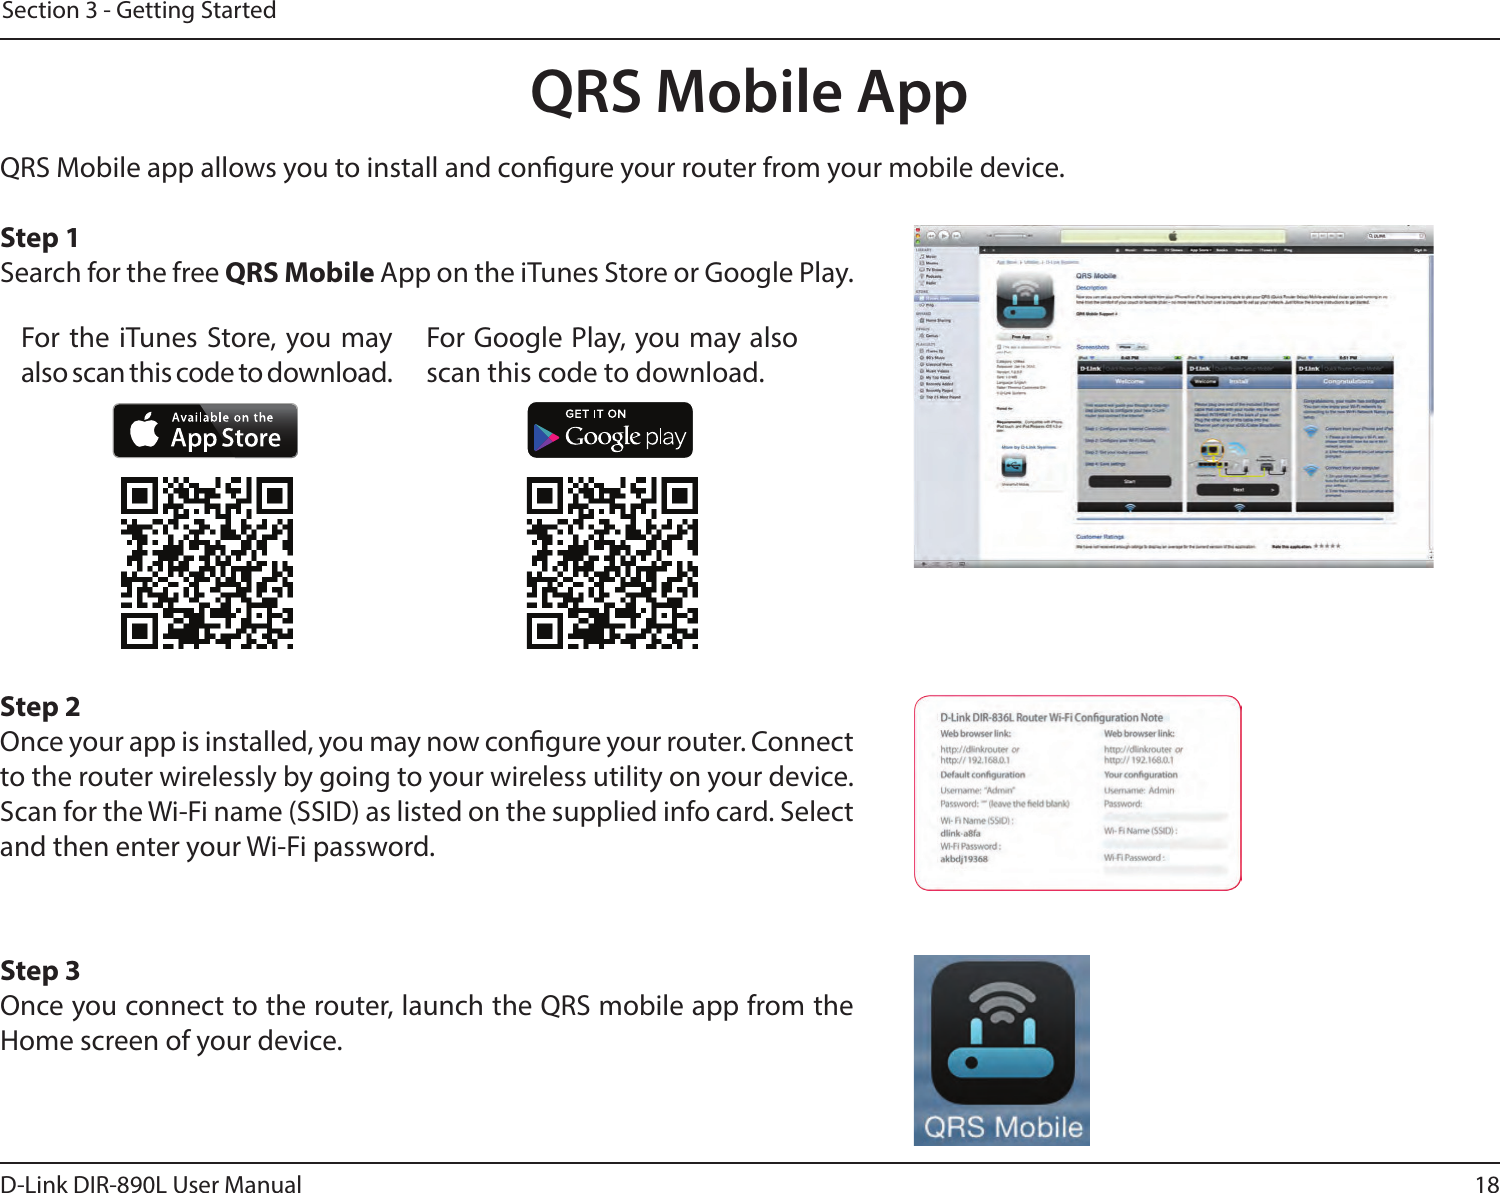 18D-Link DIR-890L User ManualSection 3 - Getting StartedQRS Mobile AppQRS Mobile app allows you to install and congure your router from your mobile device. Step 1Search for the free QRS Mobile App on the iTunes Store or Google Play.Step 2Once your app is installed, you may now congure your router. Connect to the router wirelessly by going to your wireless utility on your device. Scan for the Wi-Fi name (SSID) as listed on the supplied info card. Select and then enter your Wi-Fi password.Step 3Once you connect to the router, launch the QRS mobile app from the Home screen of your device.For the iTunes Store, you may also scan this code to download.For Google Play, you may also scan this code to download.